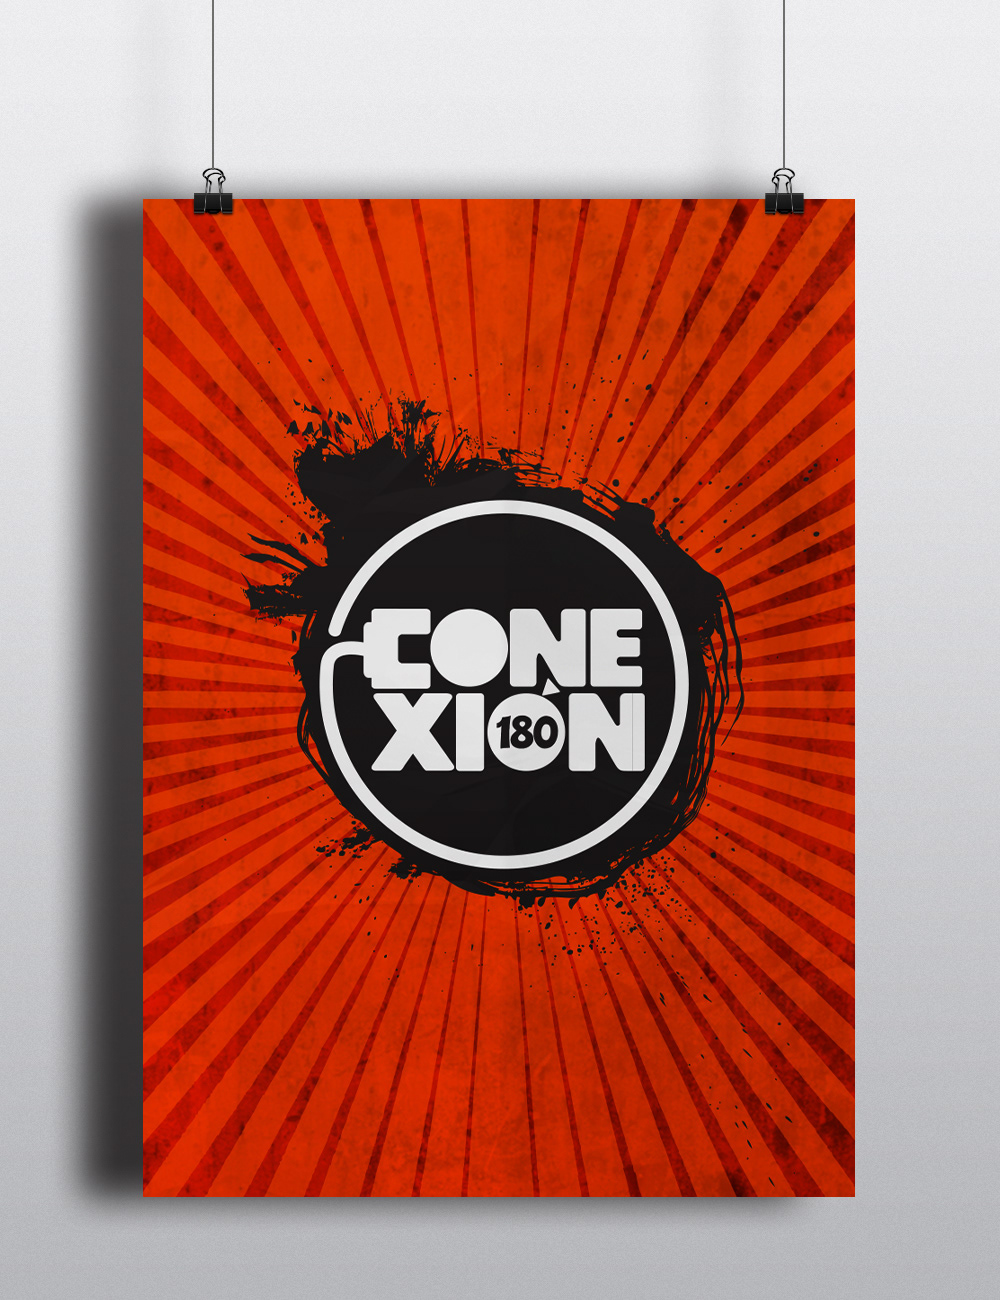 conexion church logo brand poster raylights red brushes design print